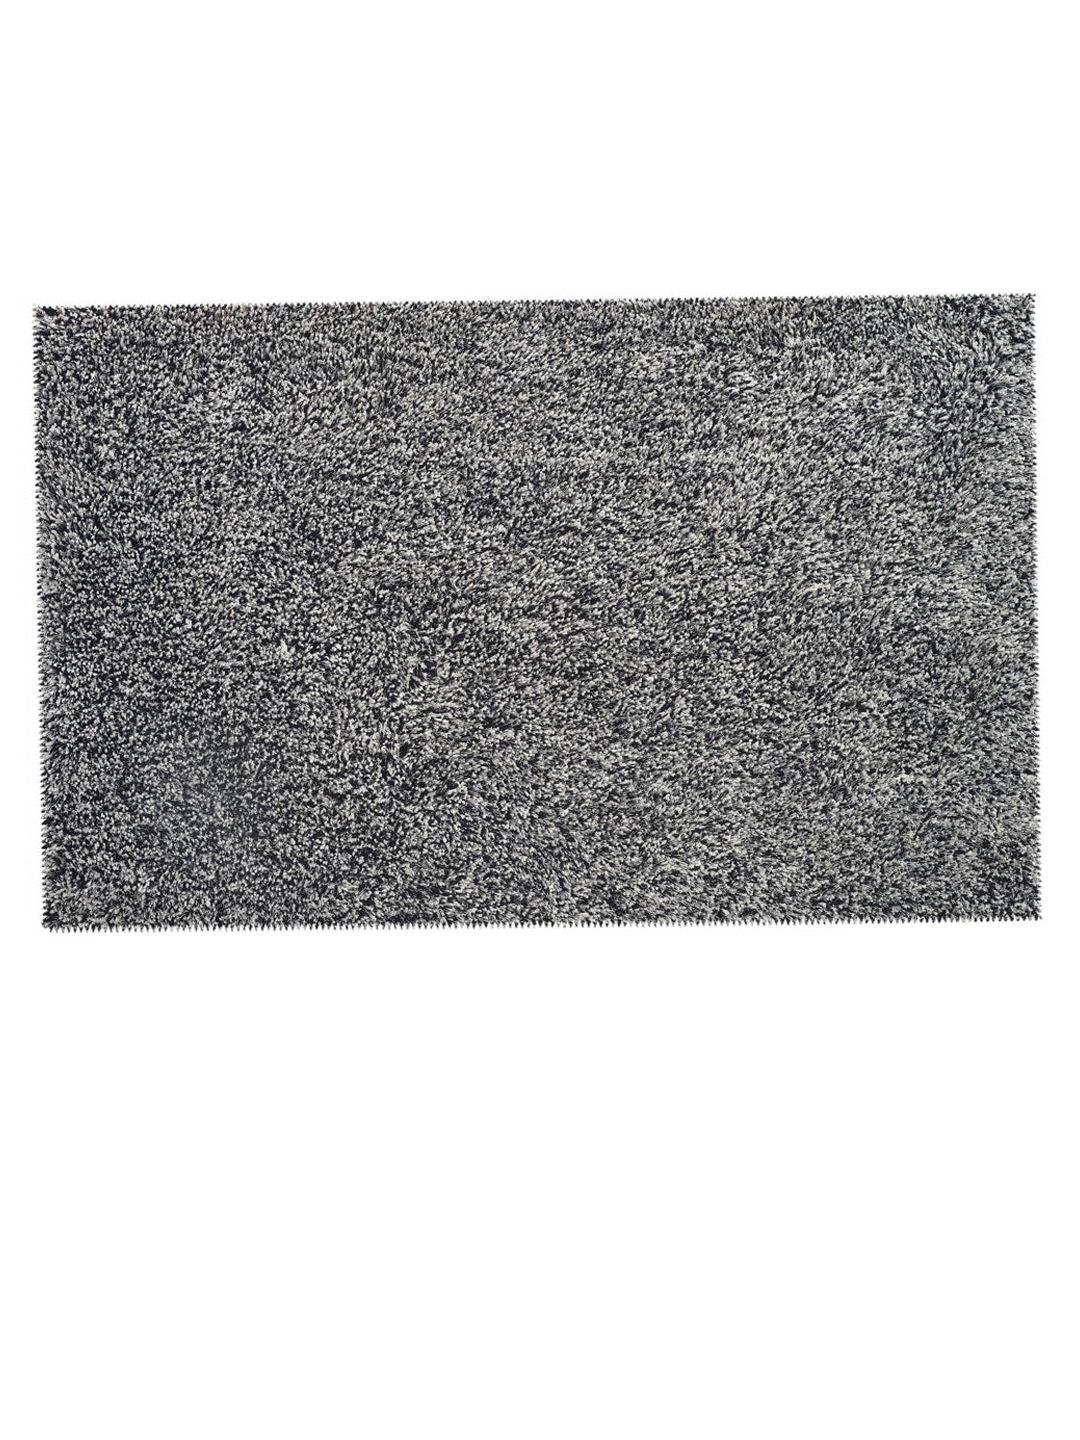 Athome by Nilkamal Black & White Microfibre Shaggy Bath Rugs Price in India